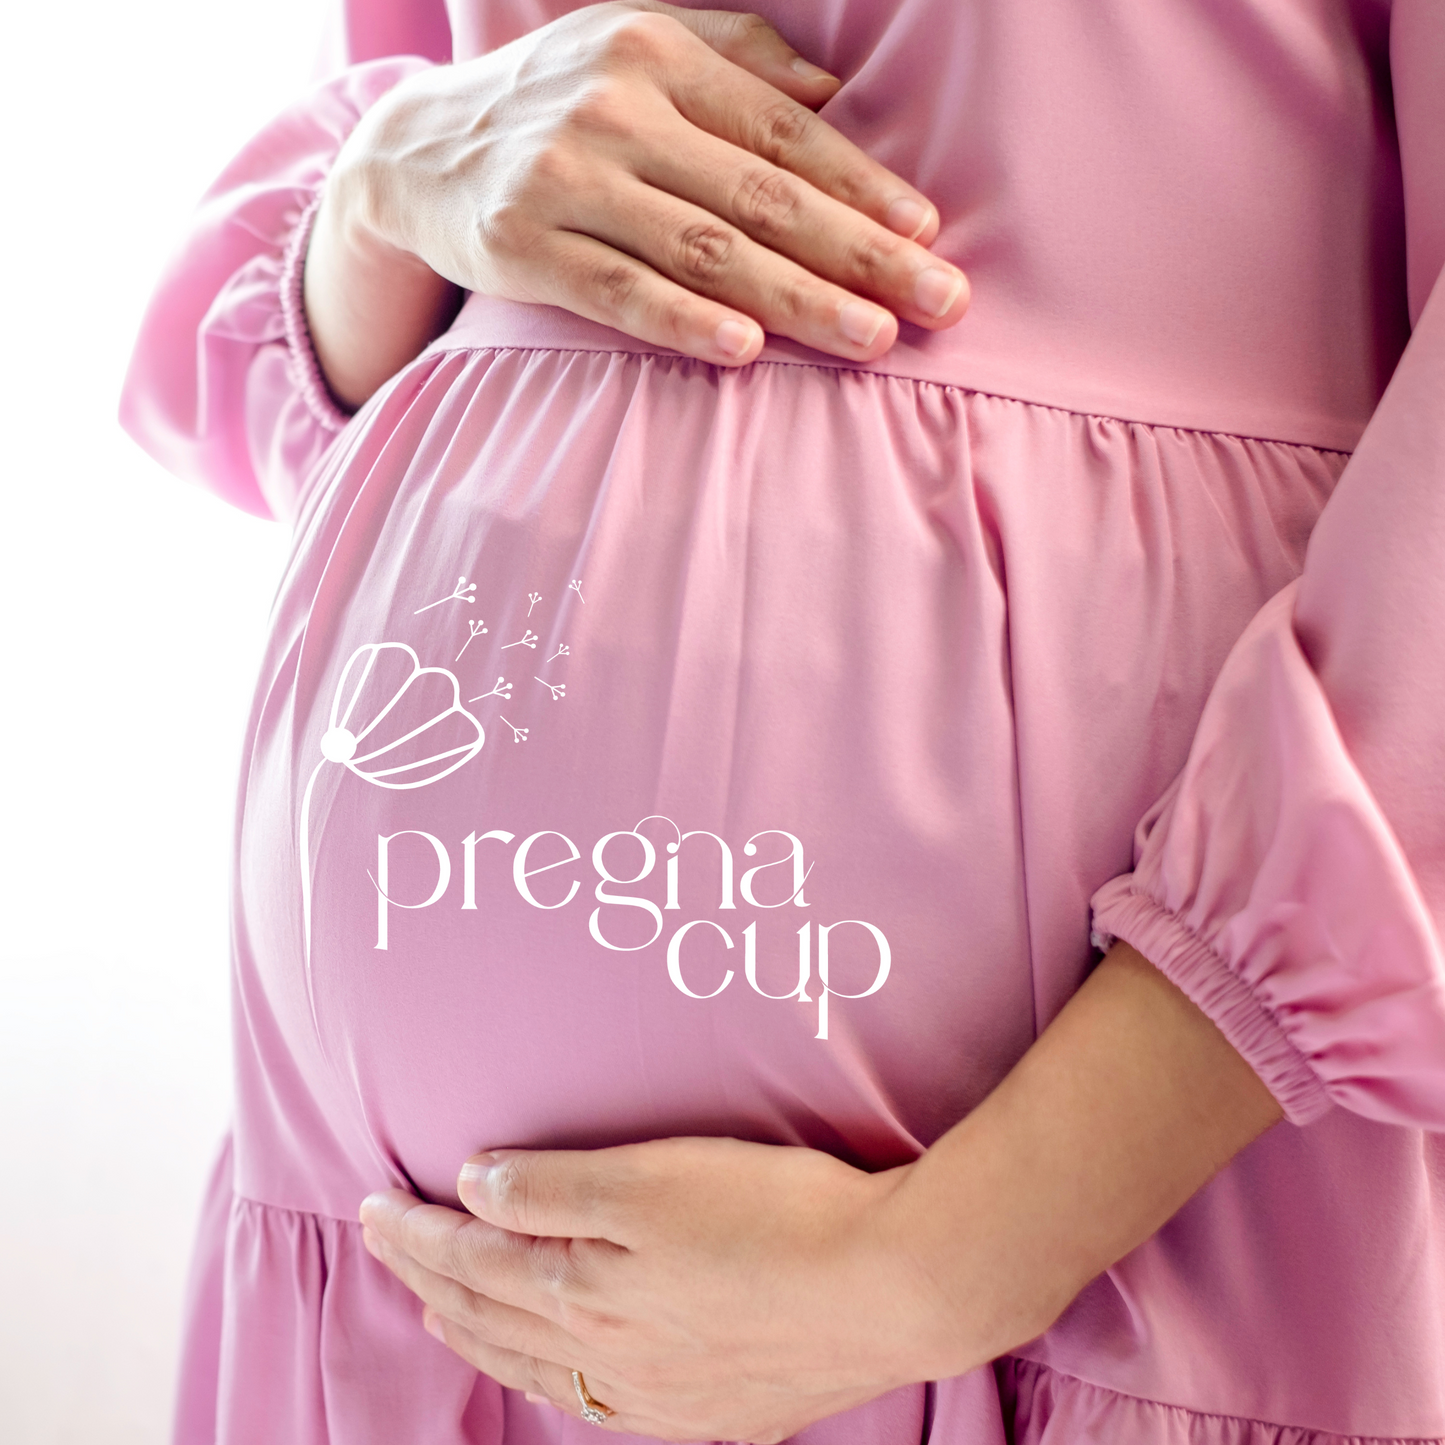 Pregnacup ® Revolutionize Your Conception Journey with the New and Improved Pregnacup – Enhanced Design for Optimal Comfort and Efficacy!